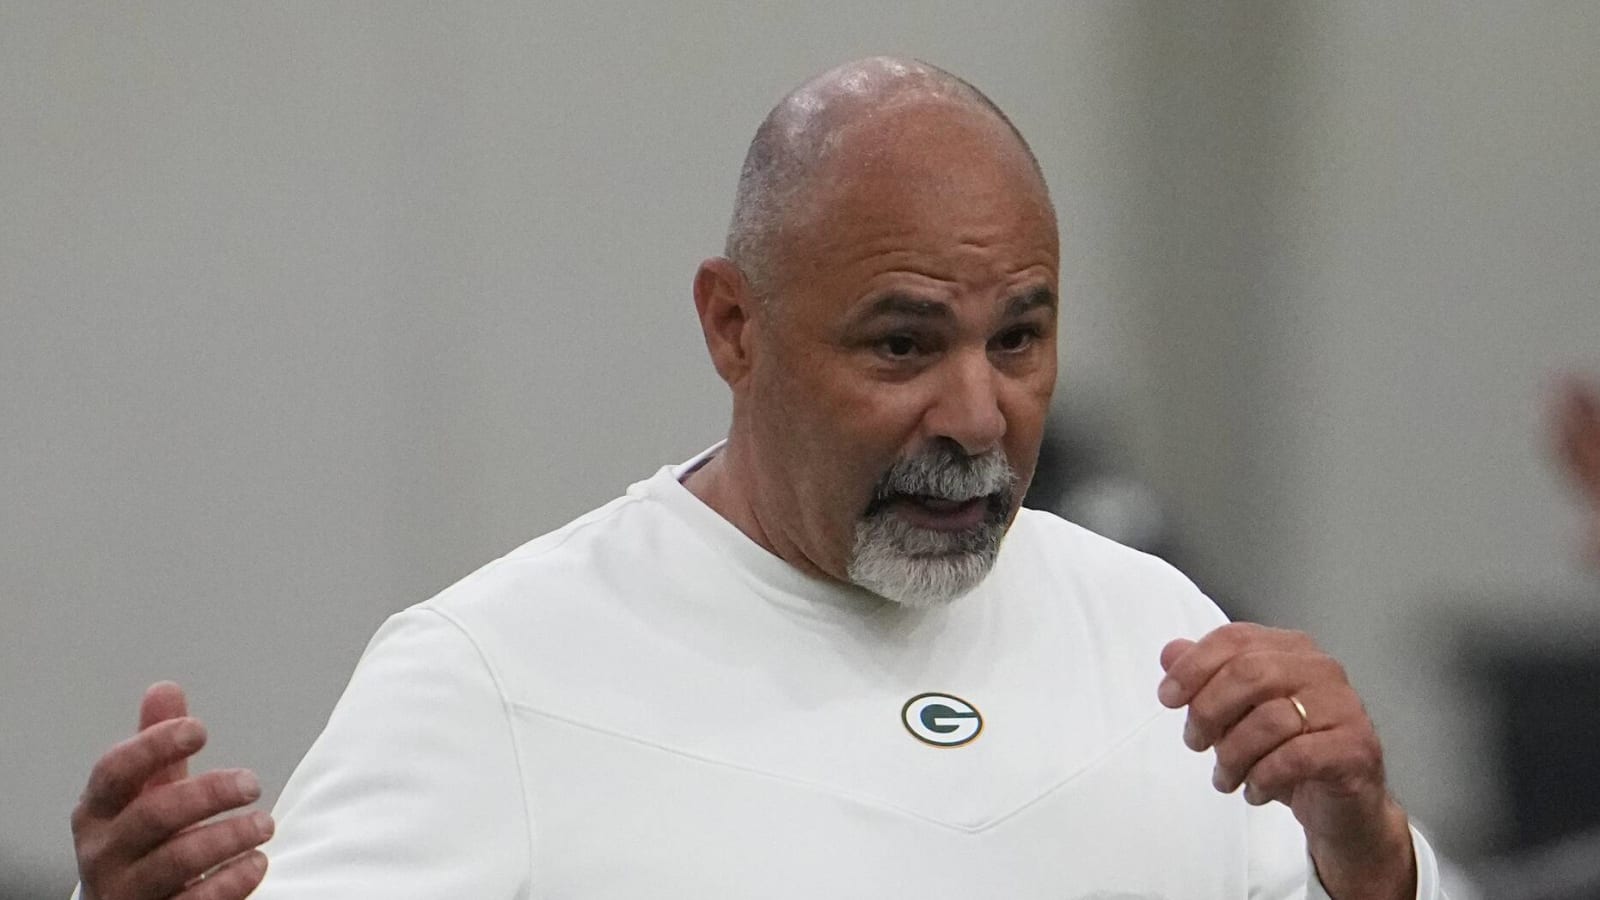 Colts conduct HC interview with Packers' Rich Bisaccia